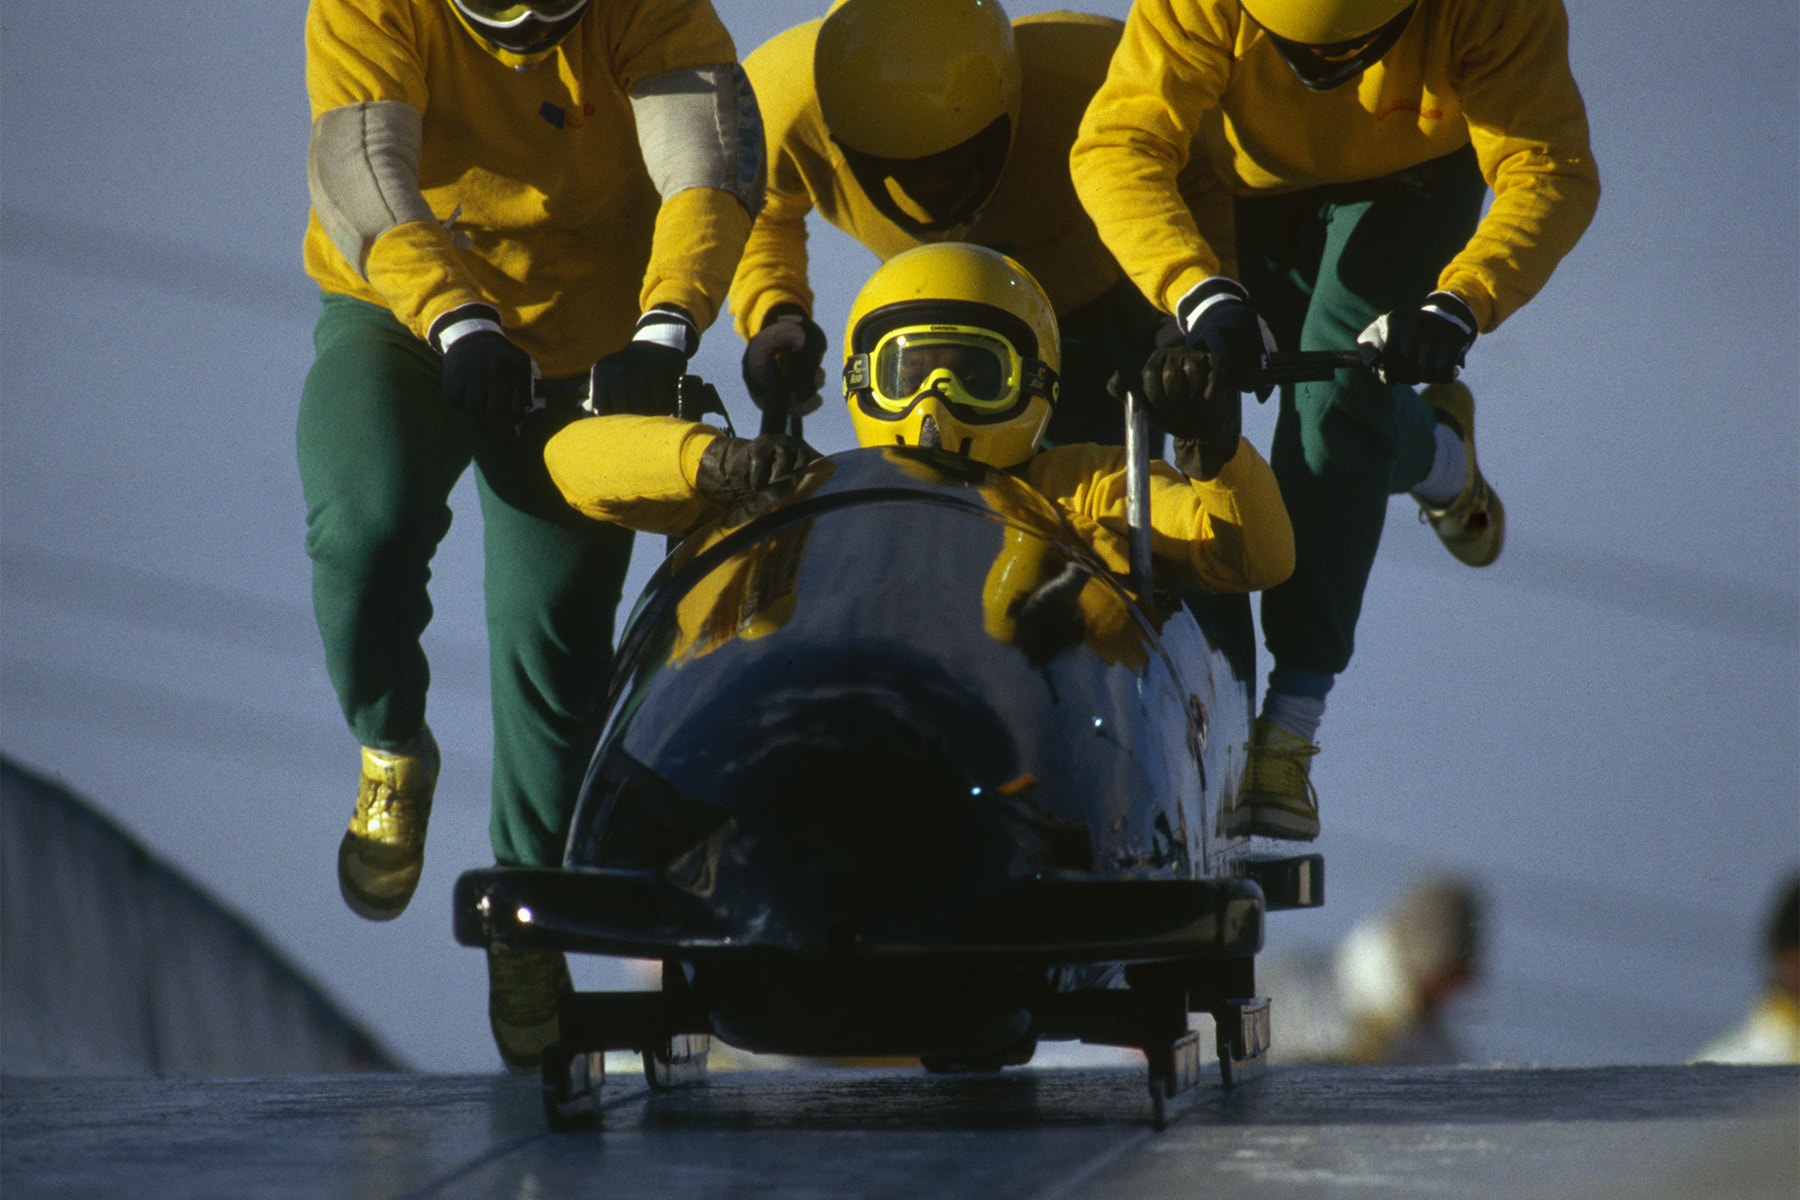 Jamaica Beijing Winter Olympics three bobsled events qualification cool runnings beijing bobsleigh bobsled skeleton race ice chris Stokes